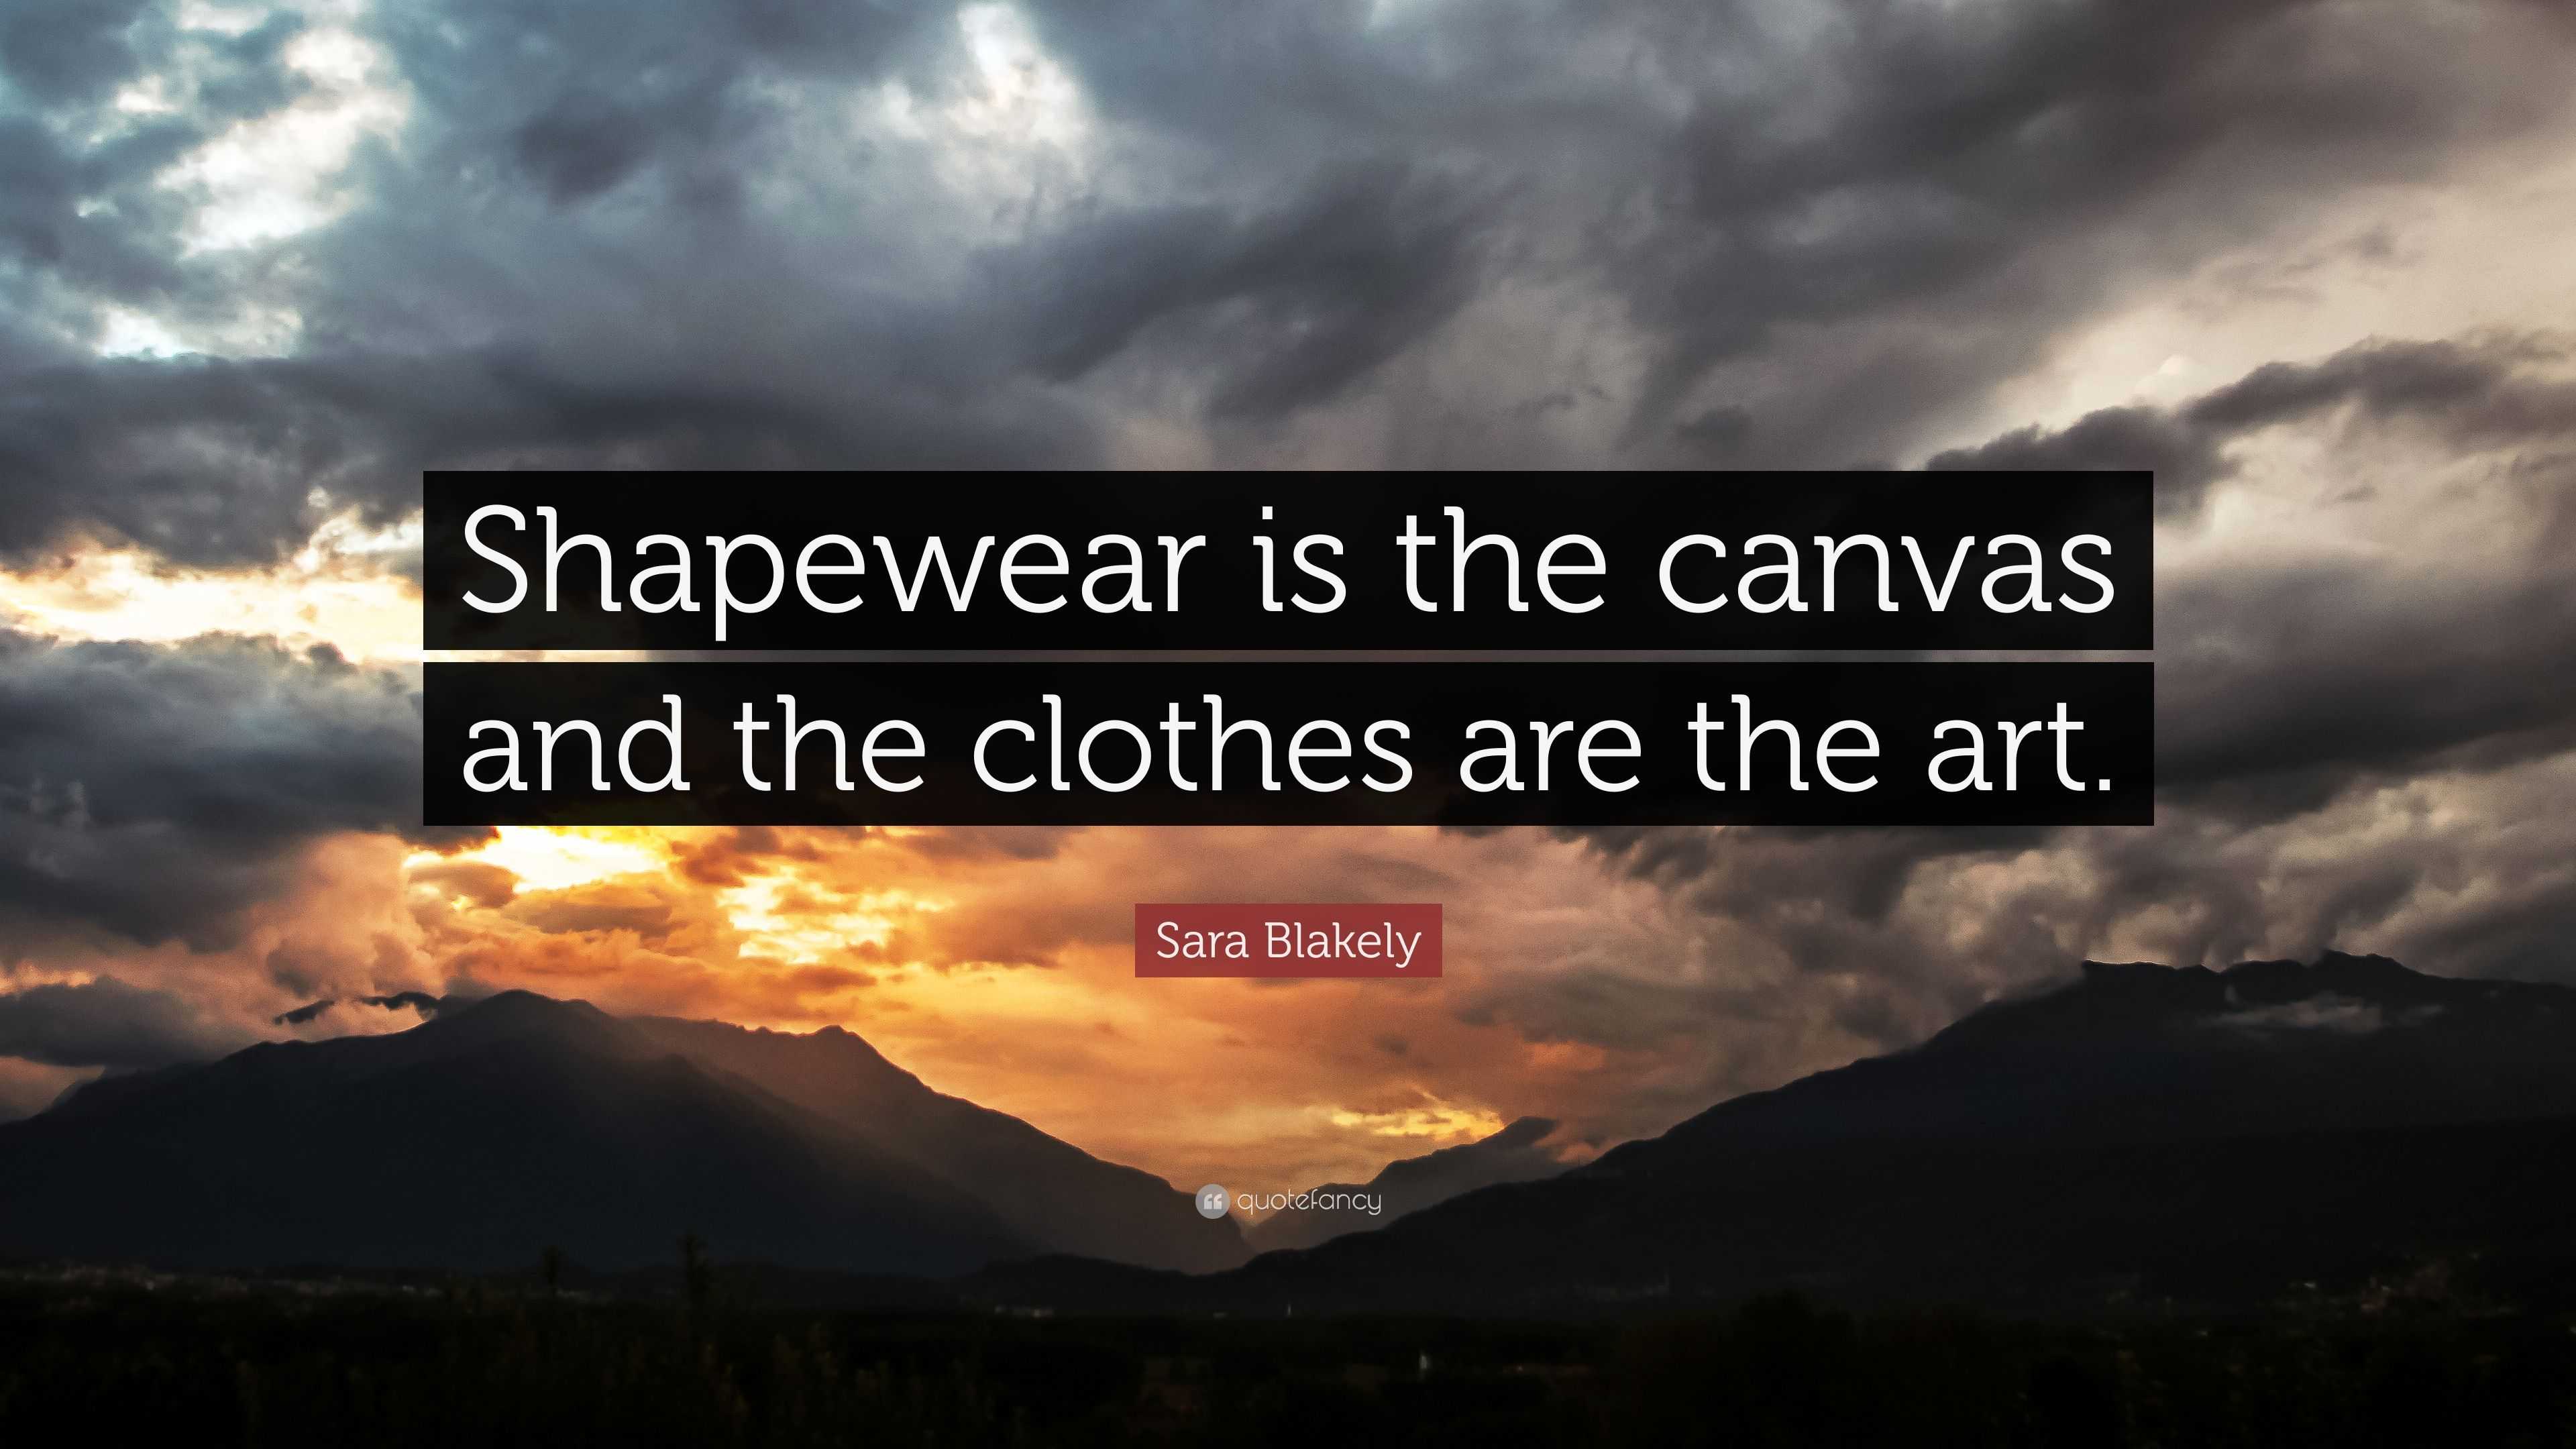 Sara Blakely Quote: “Shapewear is the canvas and the clothes are